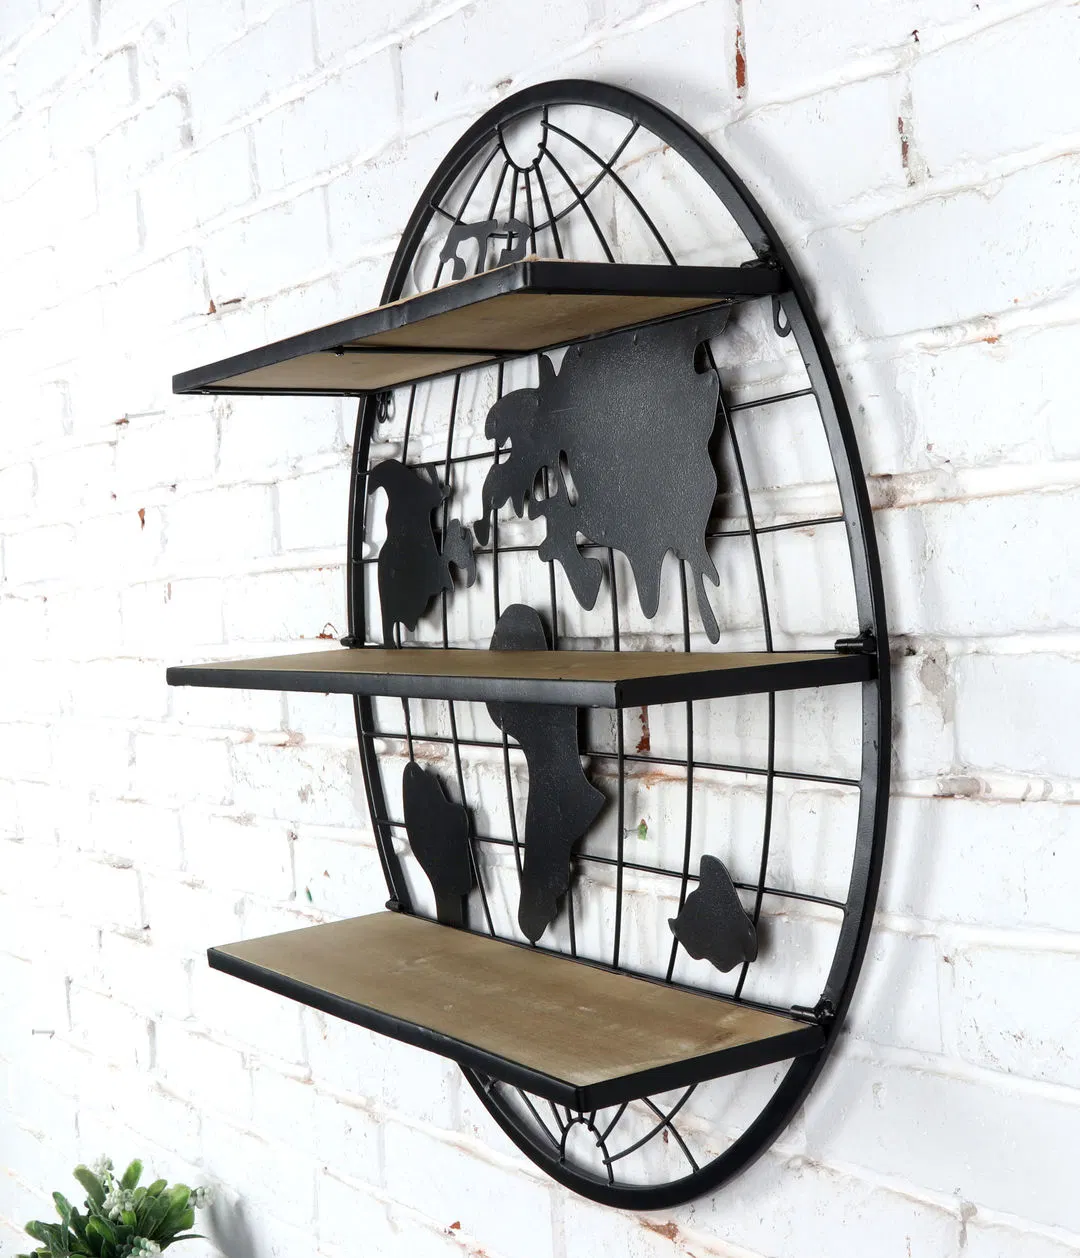 World Map Design Metal Wall Hanging with MDF Shelf, Iron Wall Decor with Map Design, Iron with MDF Wall Shelf